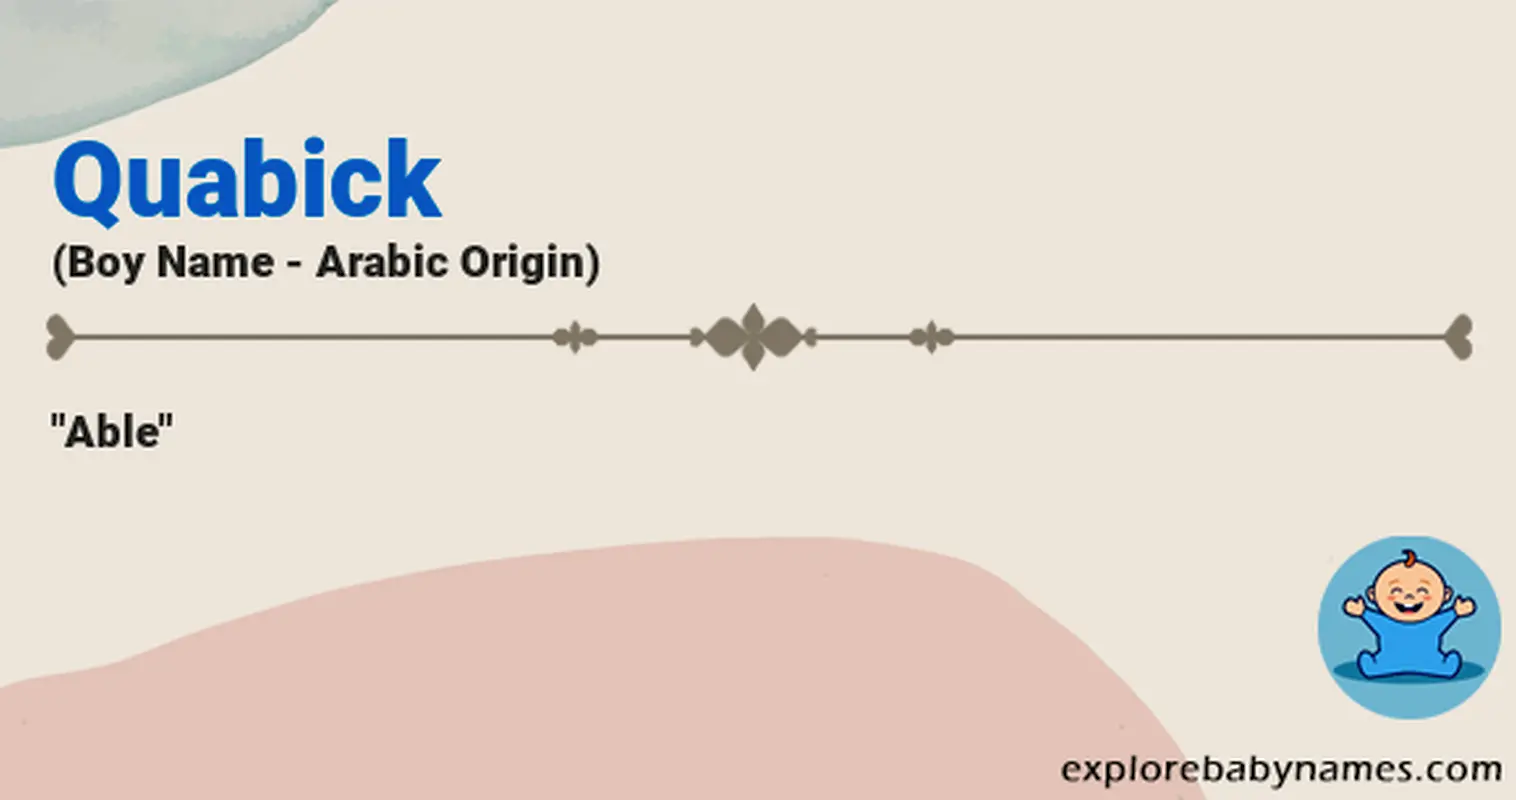 Meaning of Quabick